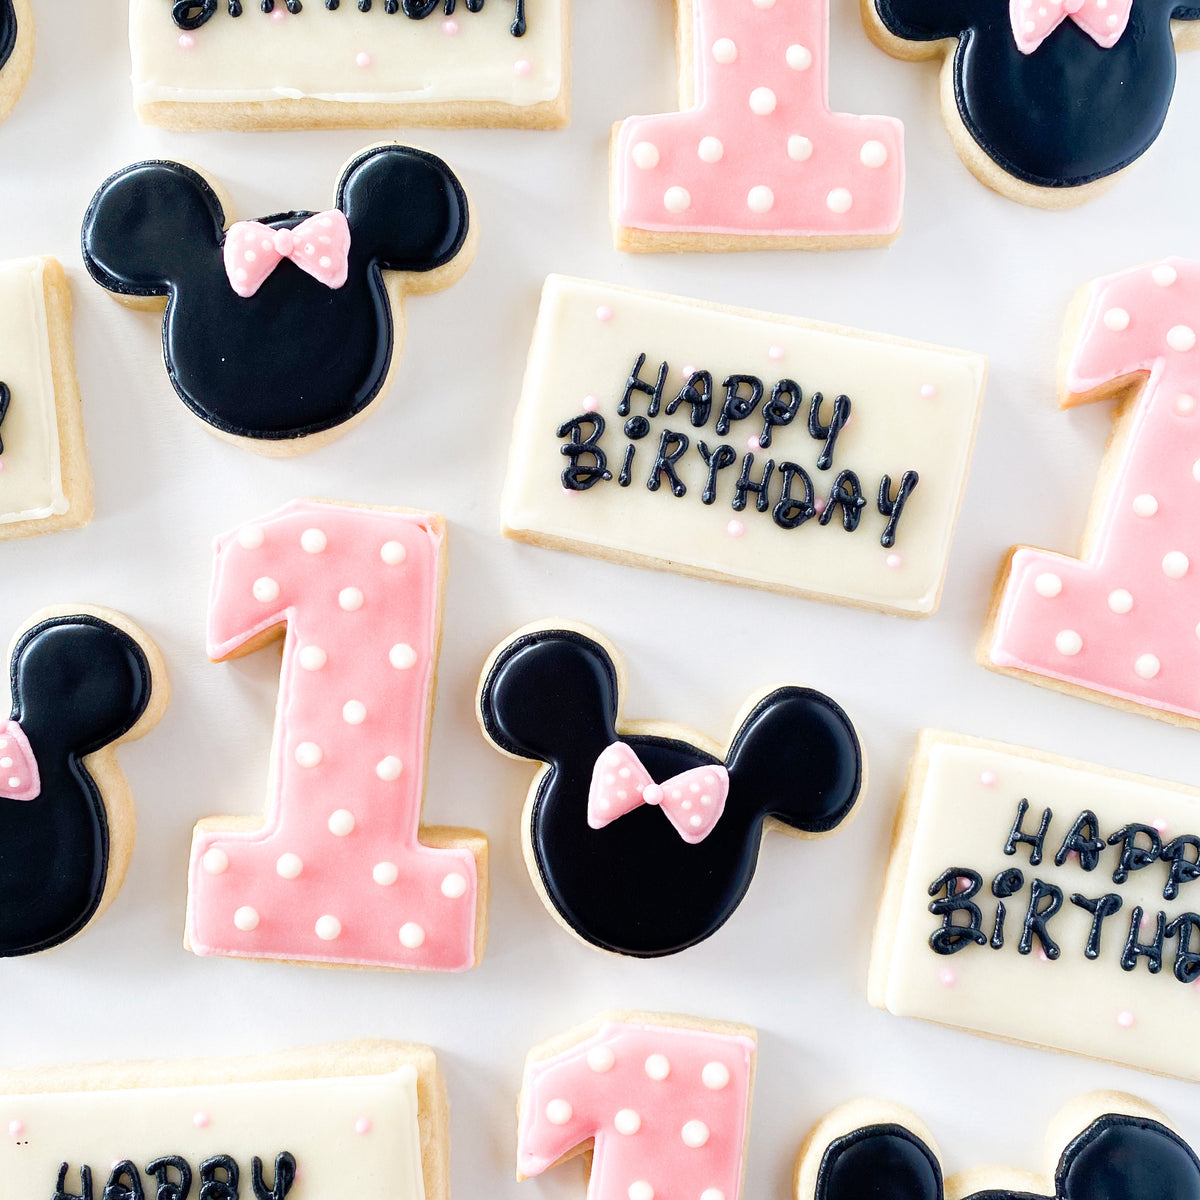 contar hasta enlace Impresionismo Mickey or Minnie Sugar Cookies – Dolce Bakery